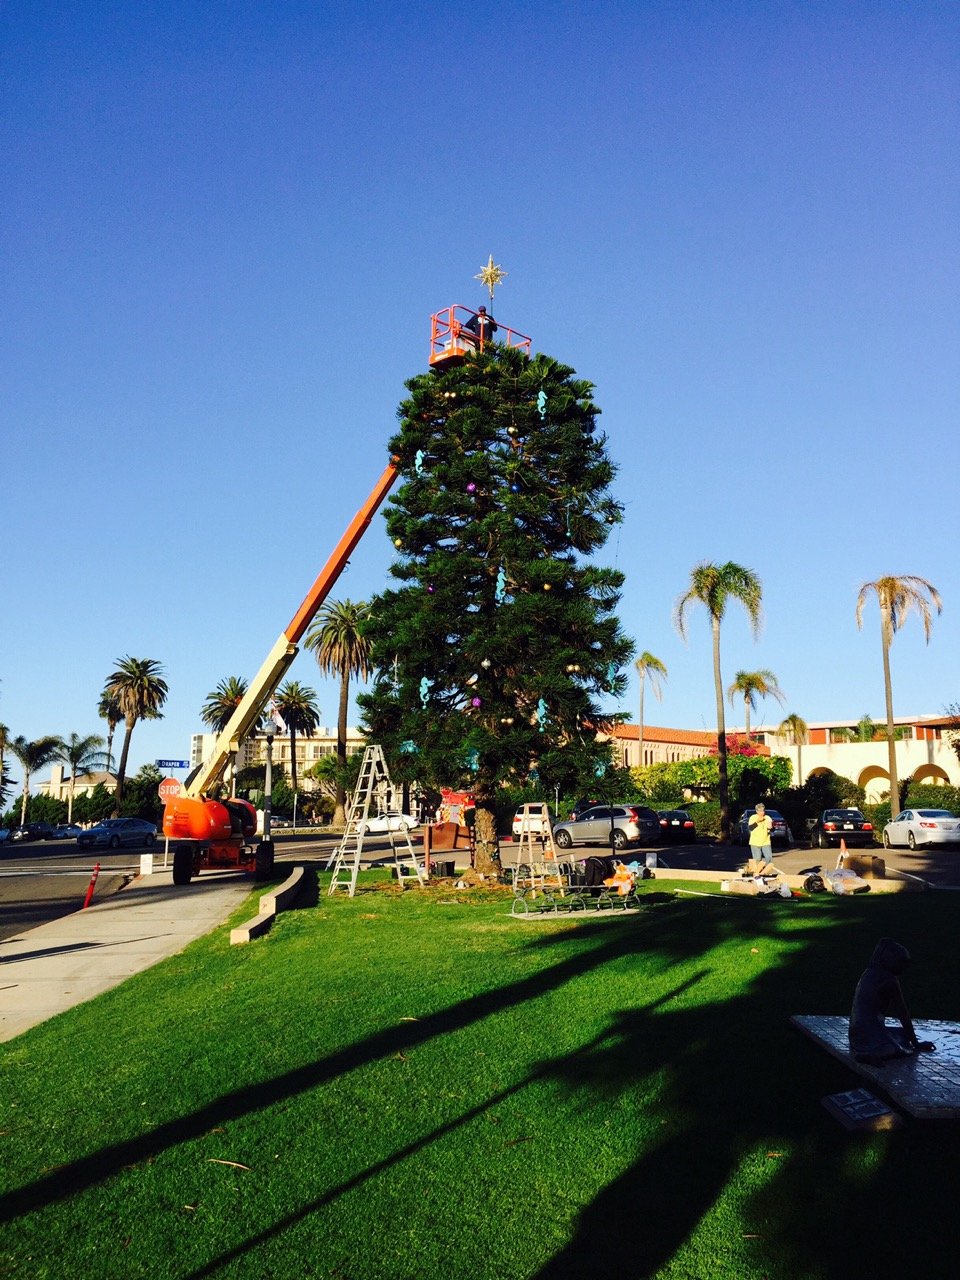 GEORGE DEWHURST PLANTED THE ORIGINAL LA JOLLA CHRISTMAS TREE IN 1983, AND GDC HAS DECORATED IT EVERY YEAR SINCE.